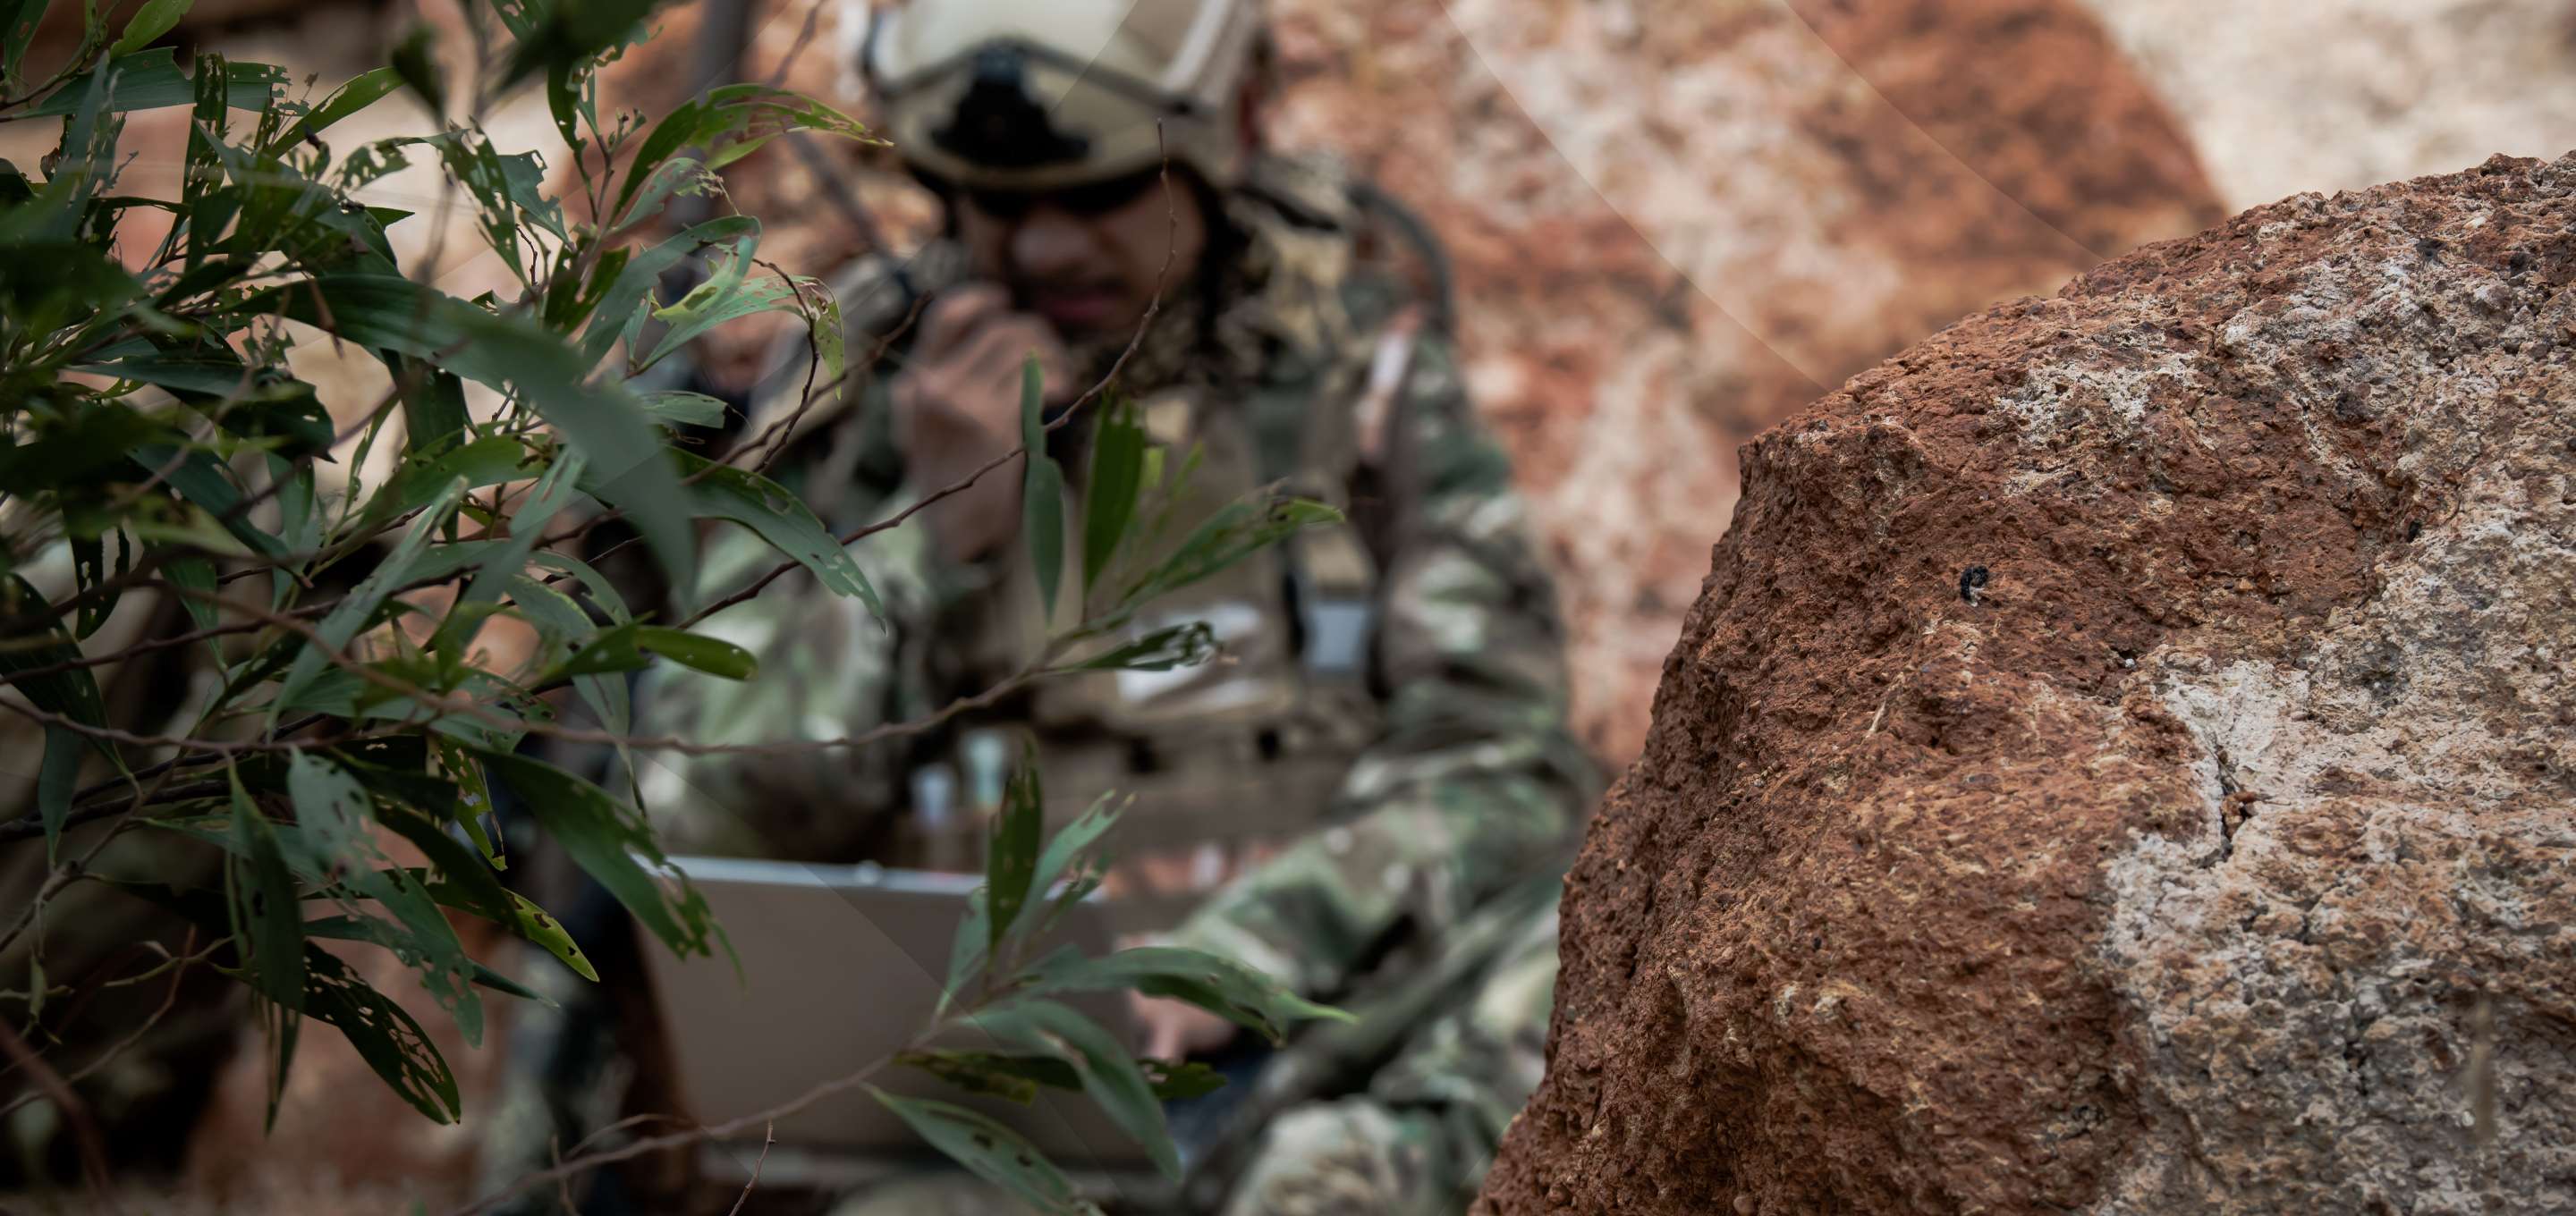 a soldier hidden between rocks and bushes using a rugged laptop